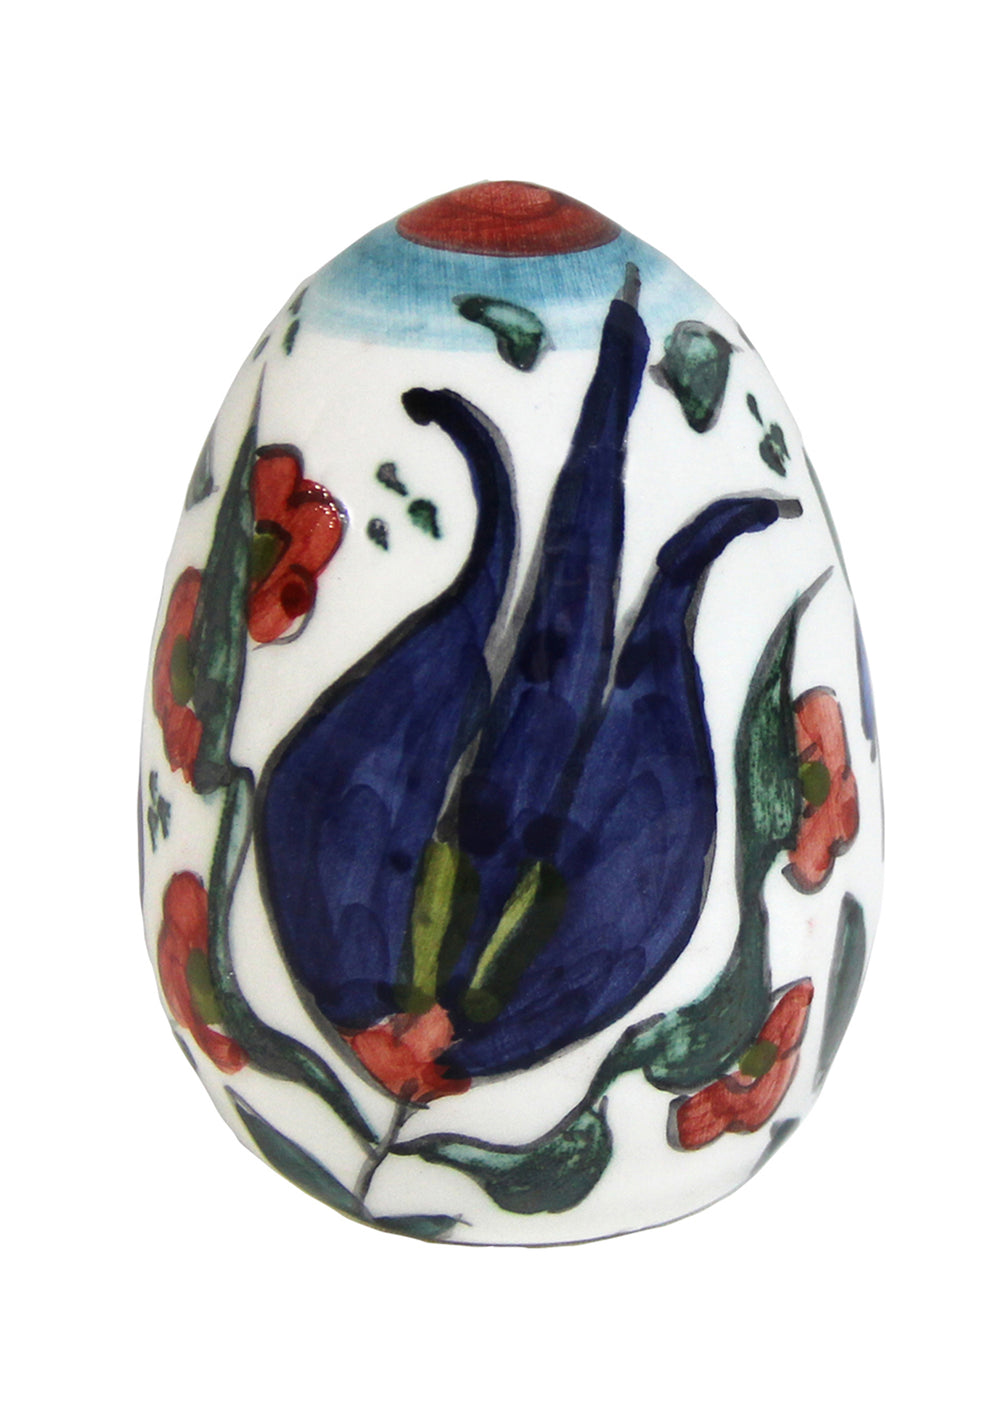 Ceramic egg with floral pattern